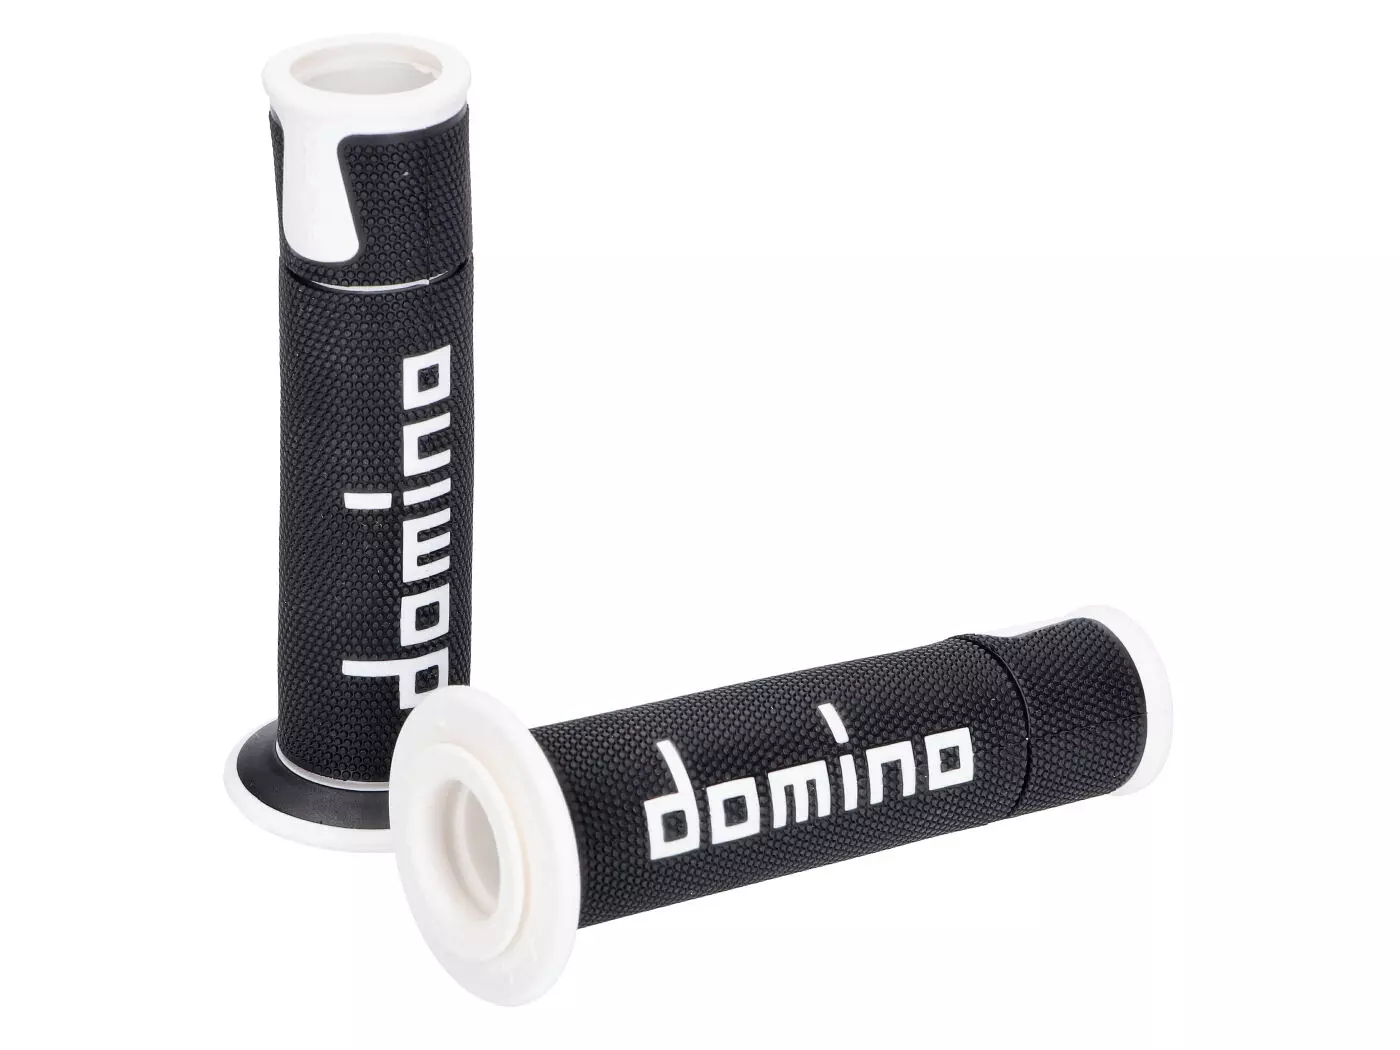 Handlebar Grip Set Domino A450 On-road Racing Black / White Open End Grips